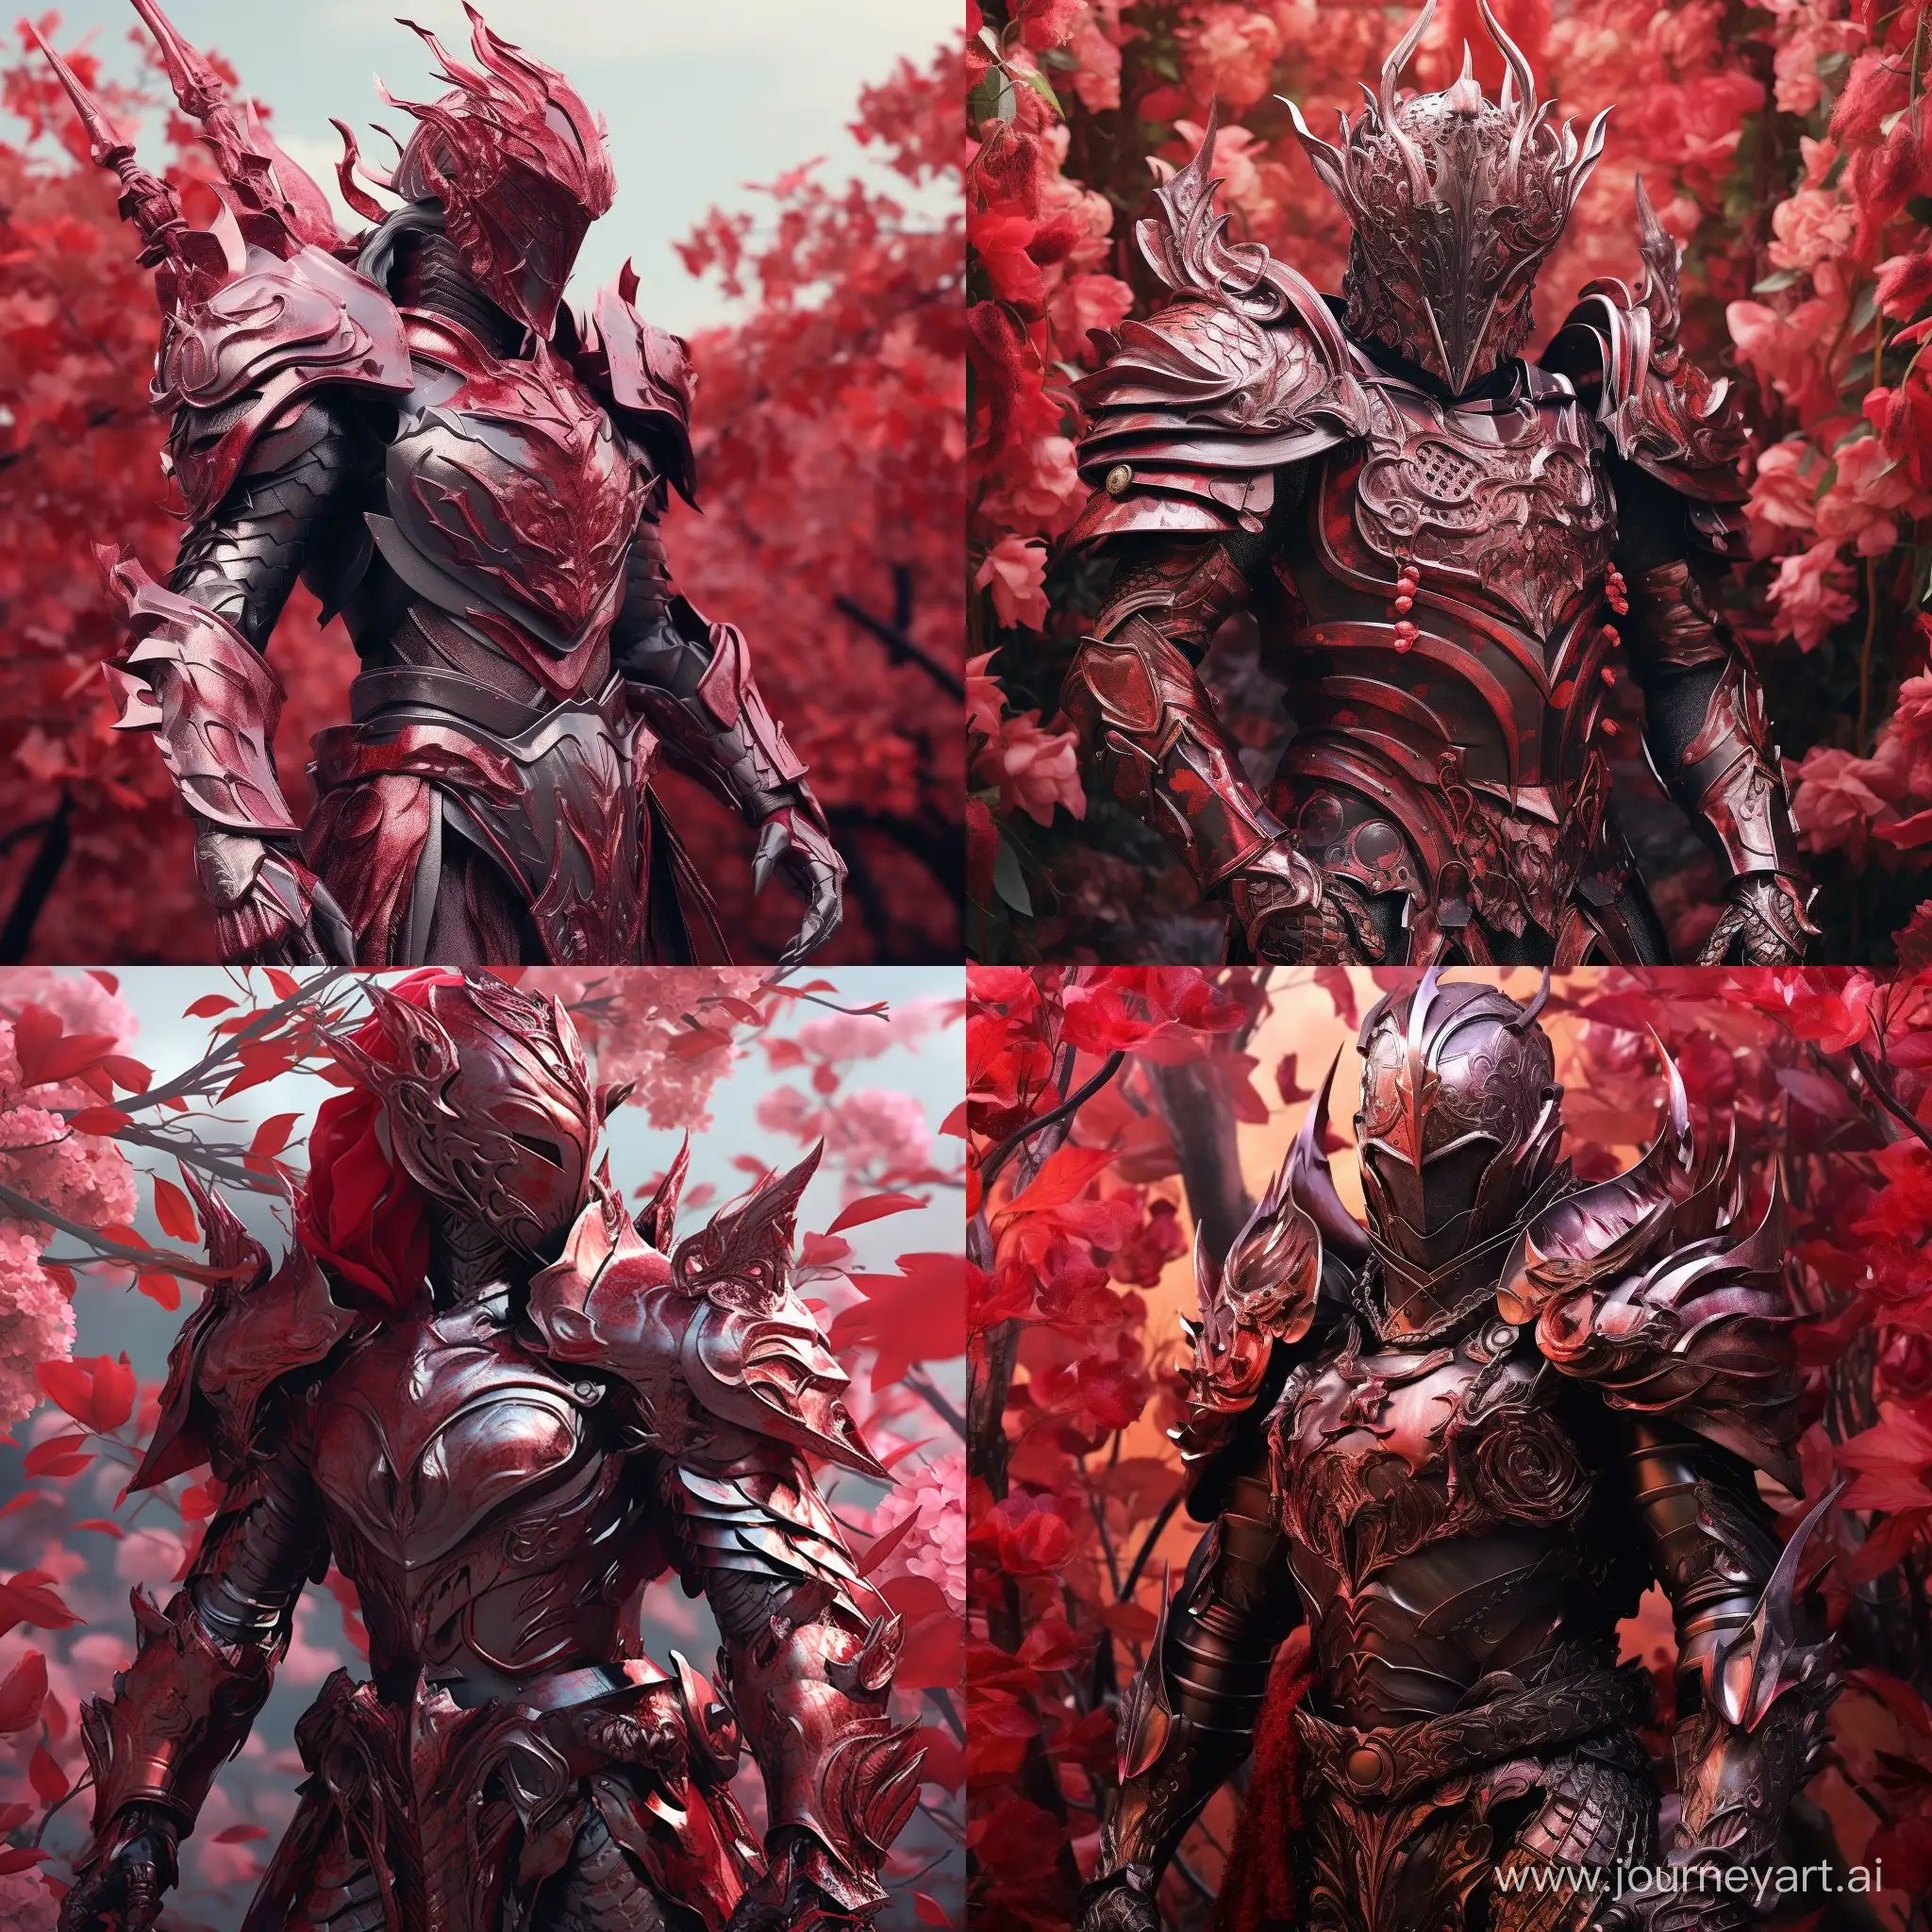 Medieval fantasy armor, full-plate armor, construct, no human features, a living armor, red color, crimson armor, red dragon scale armor, holding enchanted dark spear, flower field background